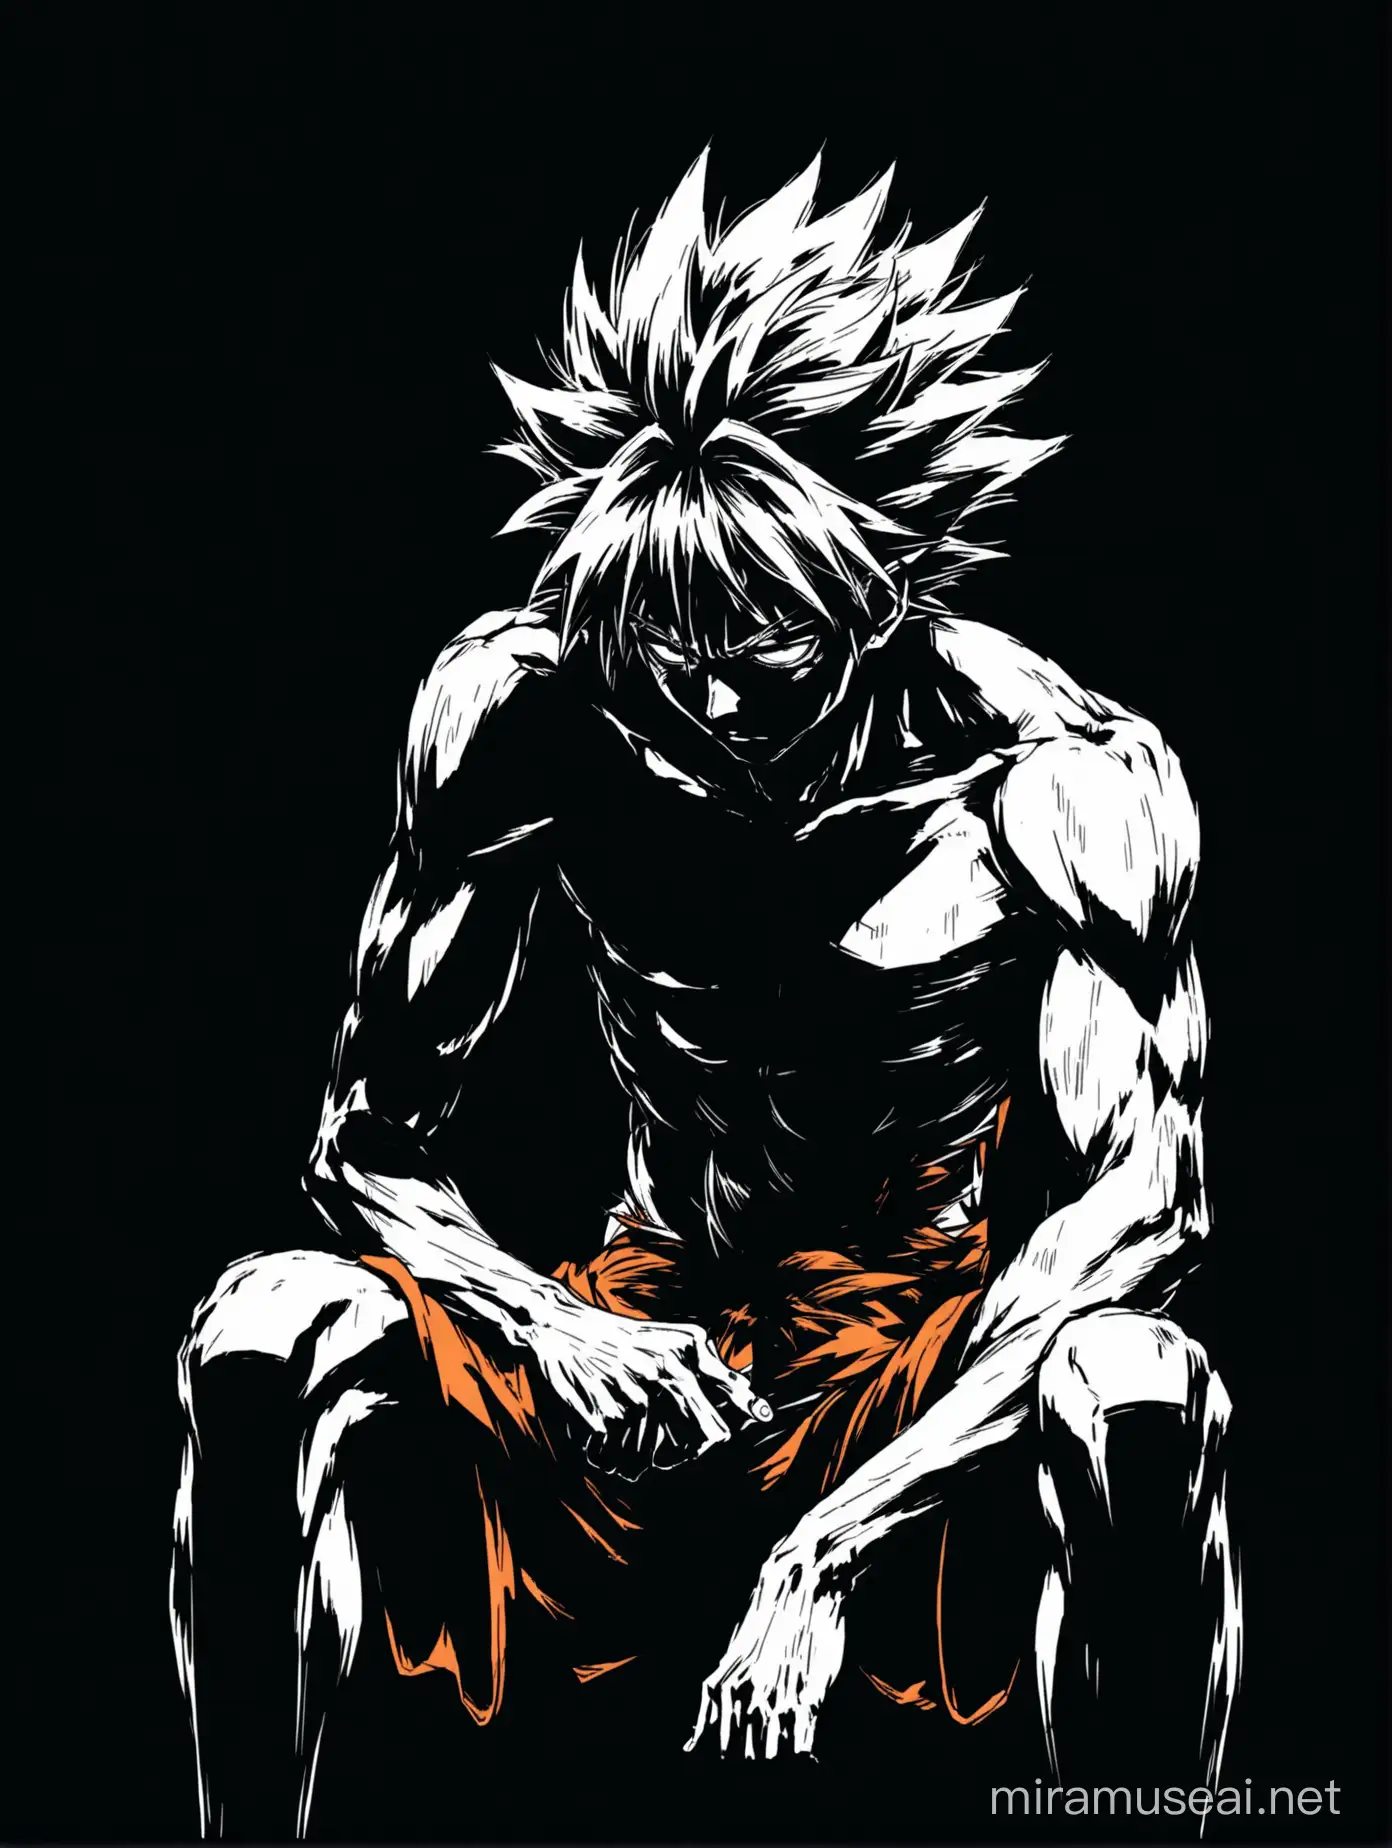 weak scrawny skinny man with a big messy haircut just like goku. he has no muscle and he is so sad almost about, he's so tired from not sleeping, he's sitting, he's in a very very dark room, he is tired of life, no vibrant colors in this image